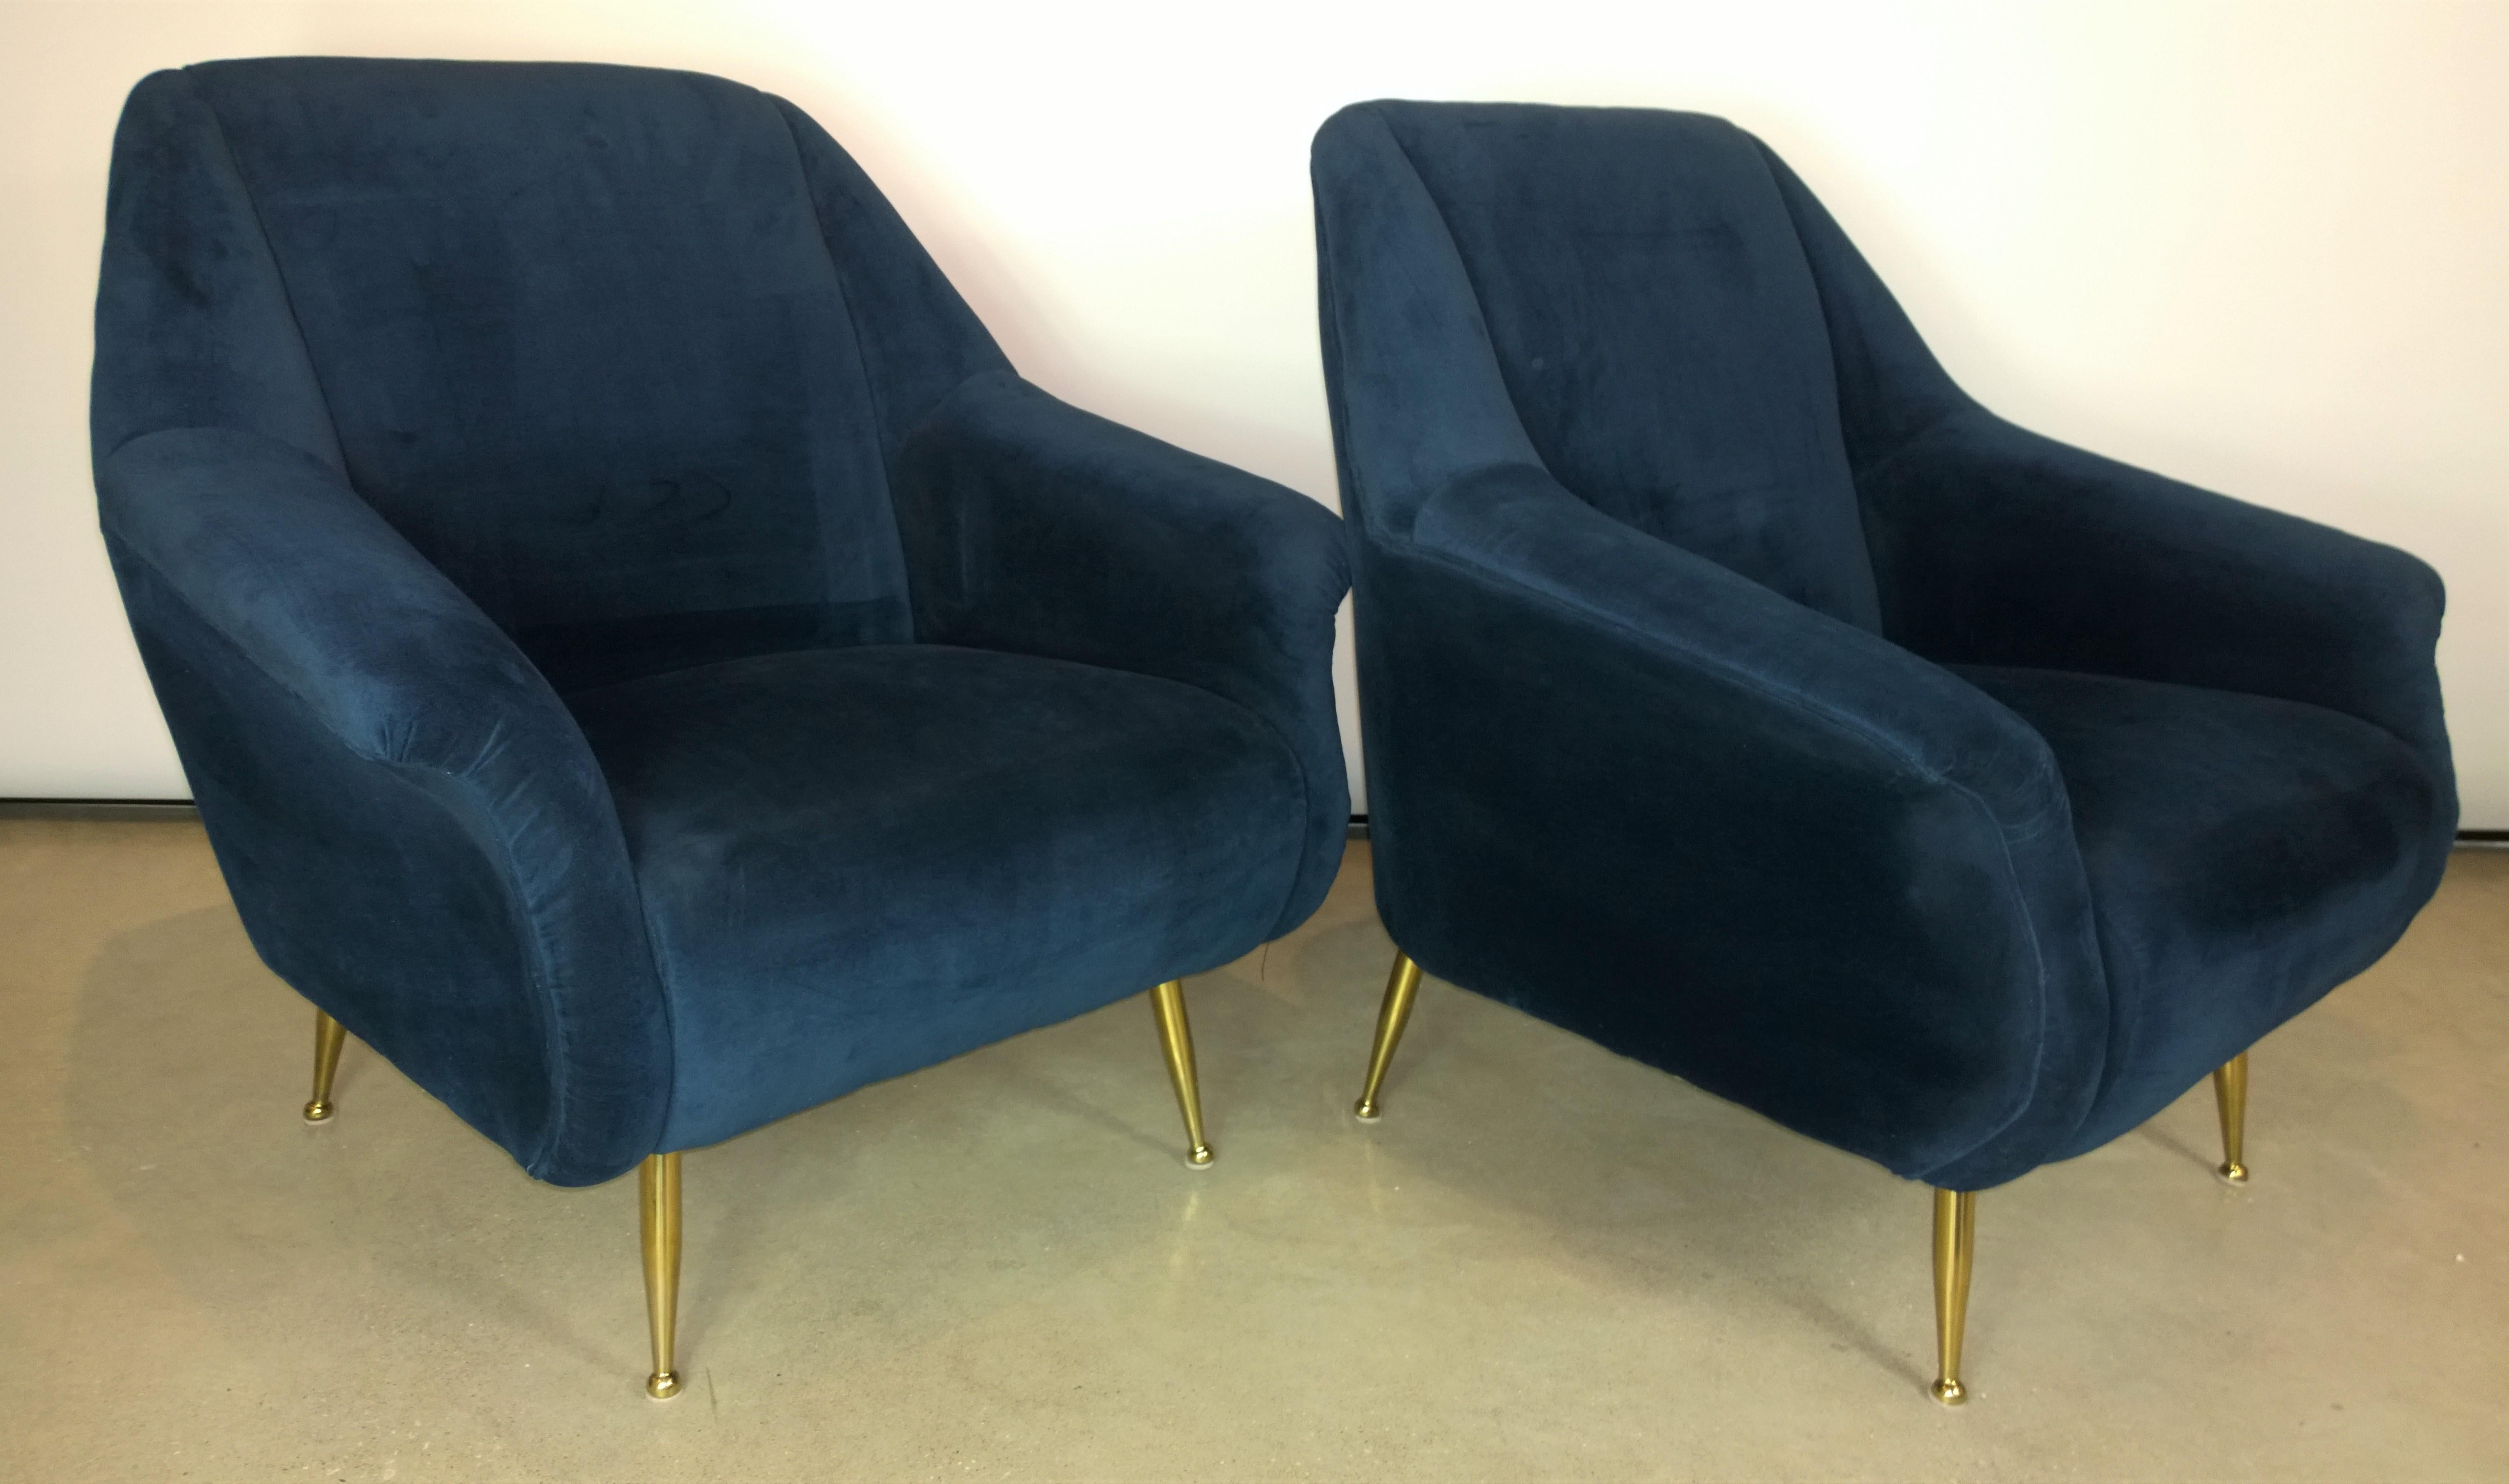 Offered is a pair of Mid-Century Modern Italian Marco Zanuso style navy velvet and new brass legs lounge or armchairs. The navy blue velvet is quite a luxe update to the chairs along with new shiny brass legs. We purchased the chairs already